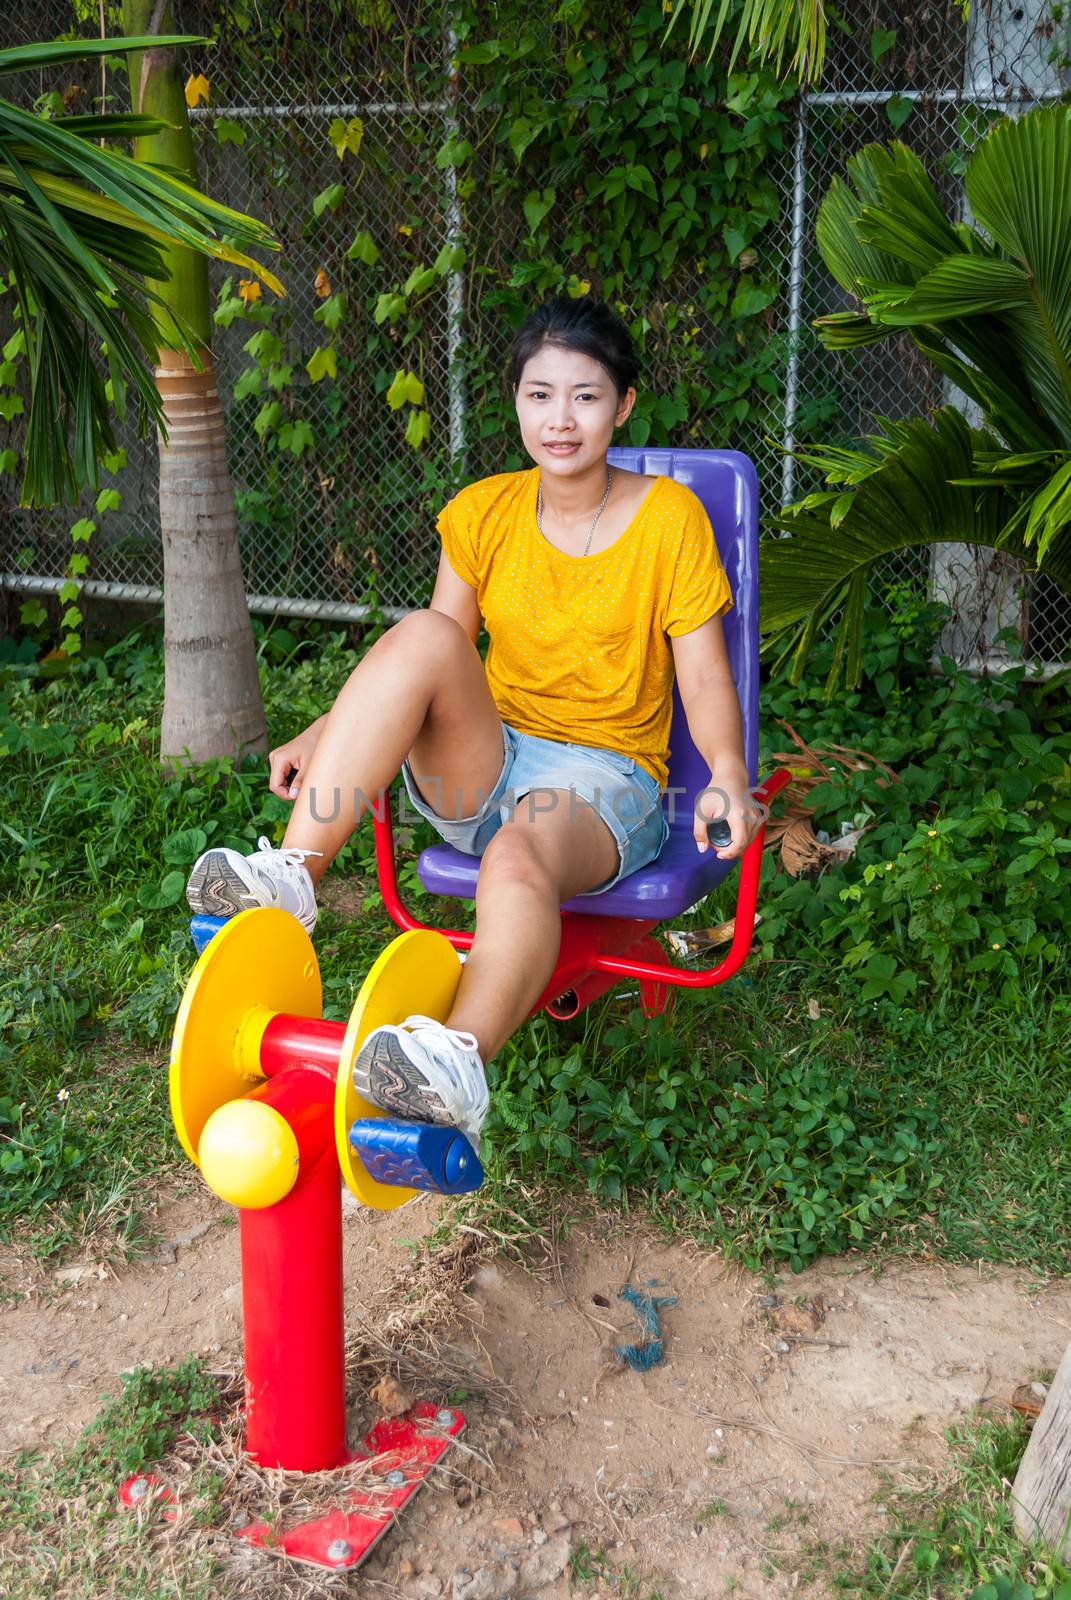 Asian Thai Girl with Exercise Machine in Public Park.